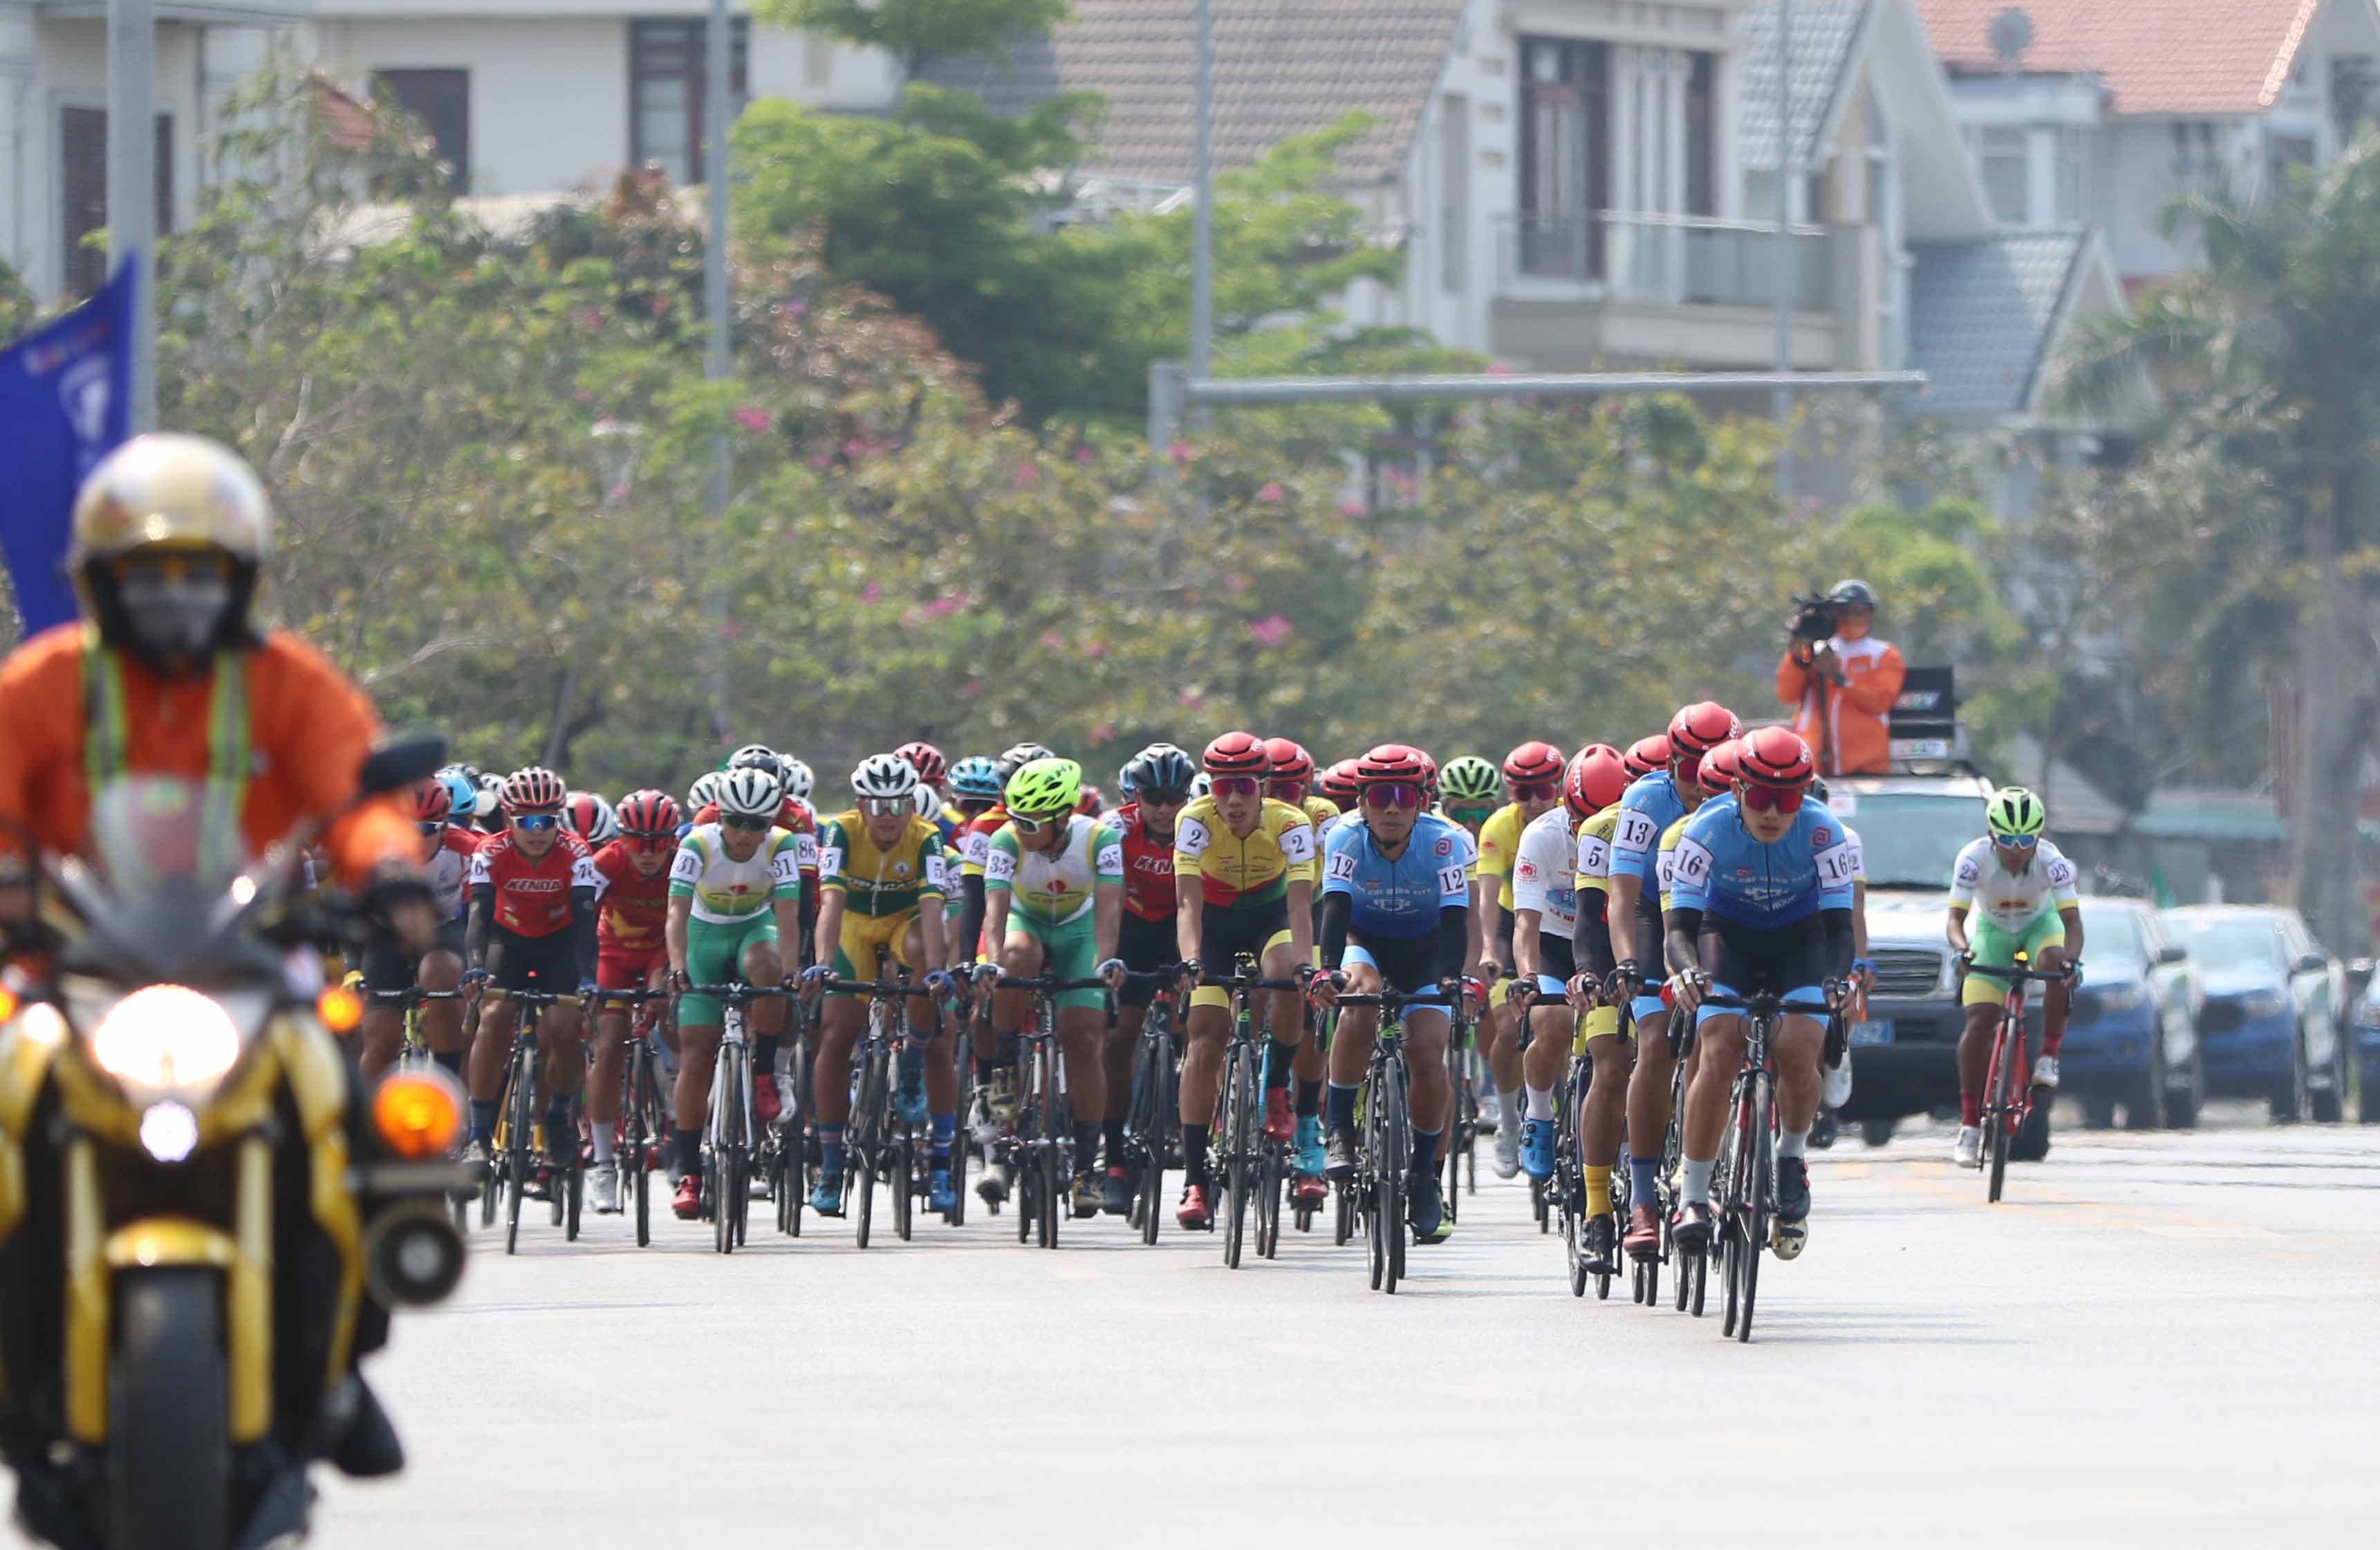 Cyclists race at the second stage of the 2022 Ho Chi Minh City TV (HTV) Cup tournament in Quang Ninh Province, Vietnam, April 6, 2022. Photo: T.P. / Tuoi Tre